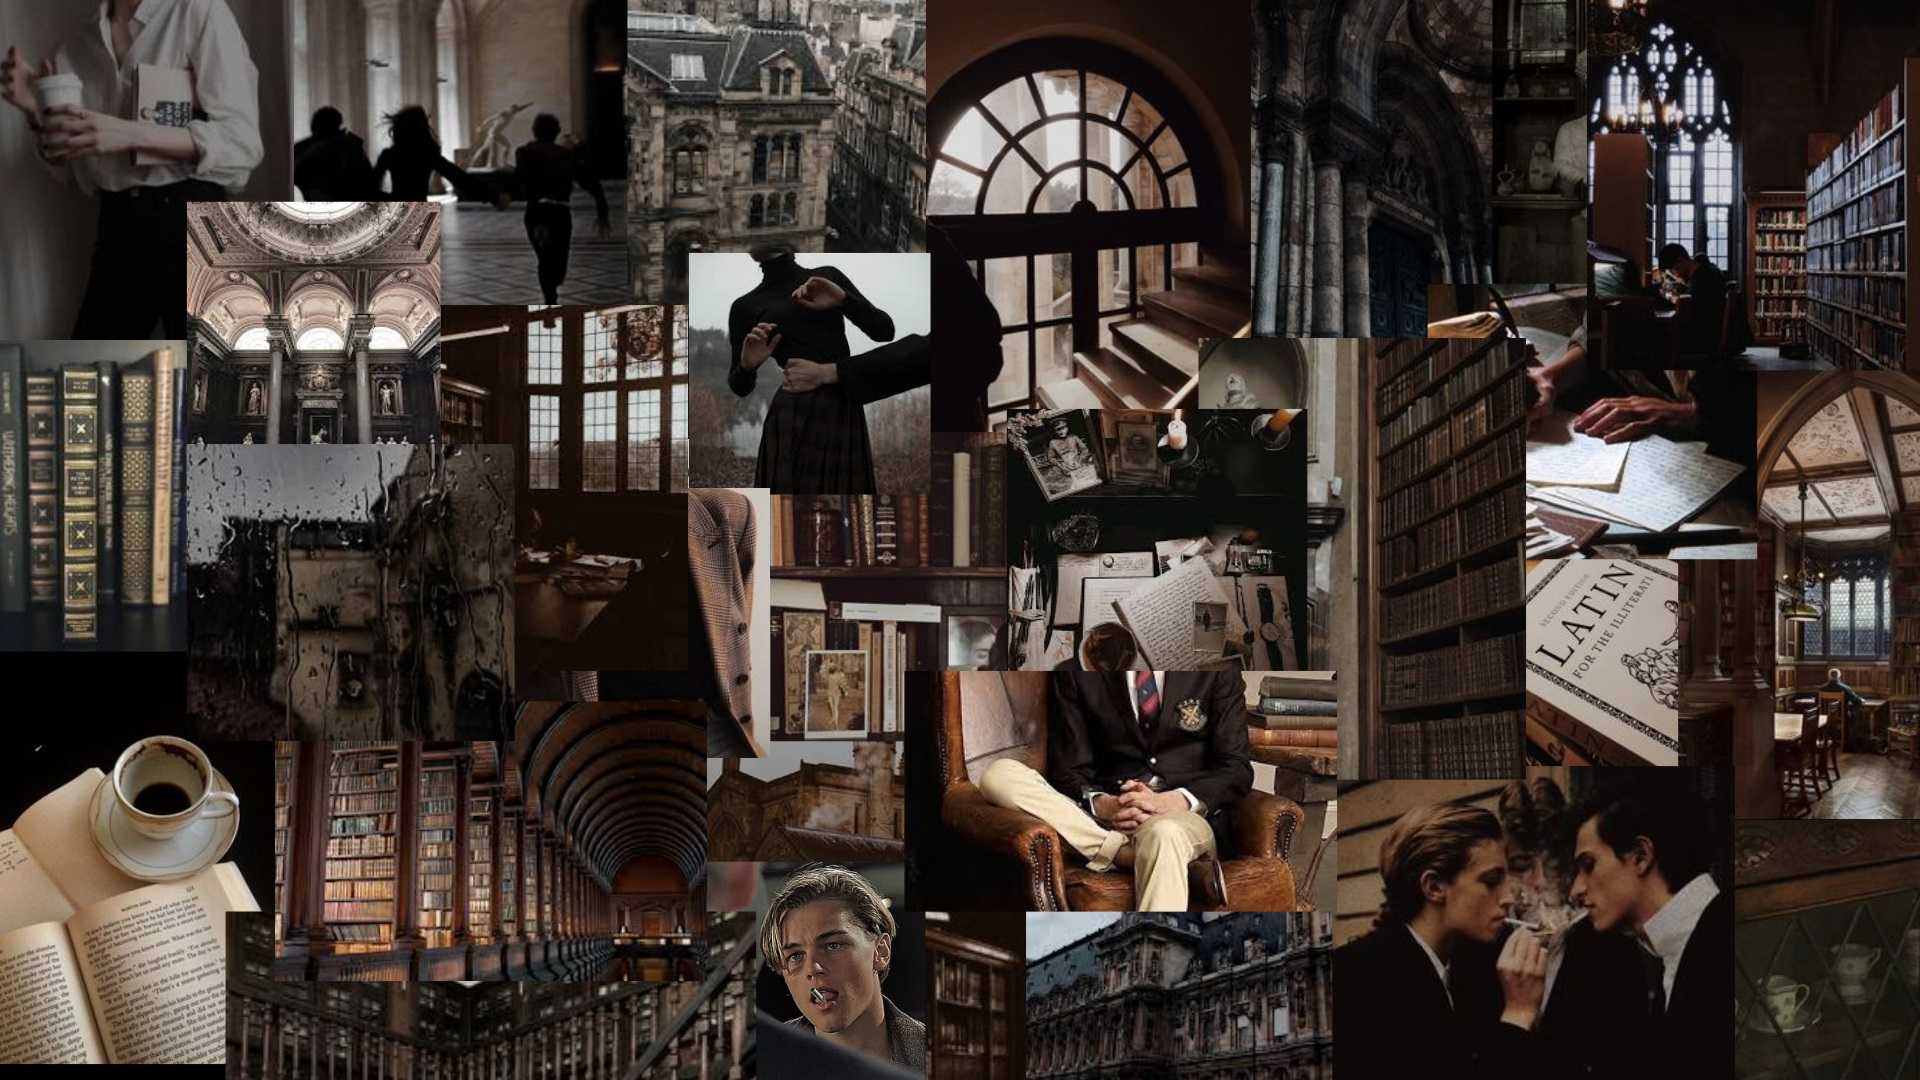 A collage of images from the film adaptation of 